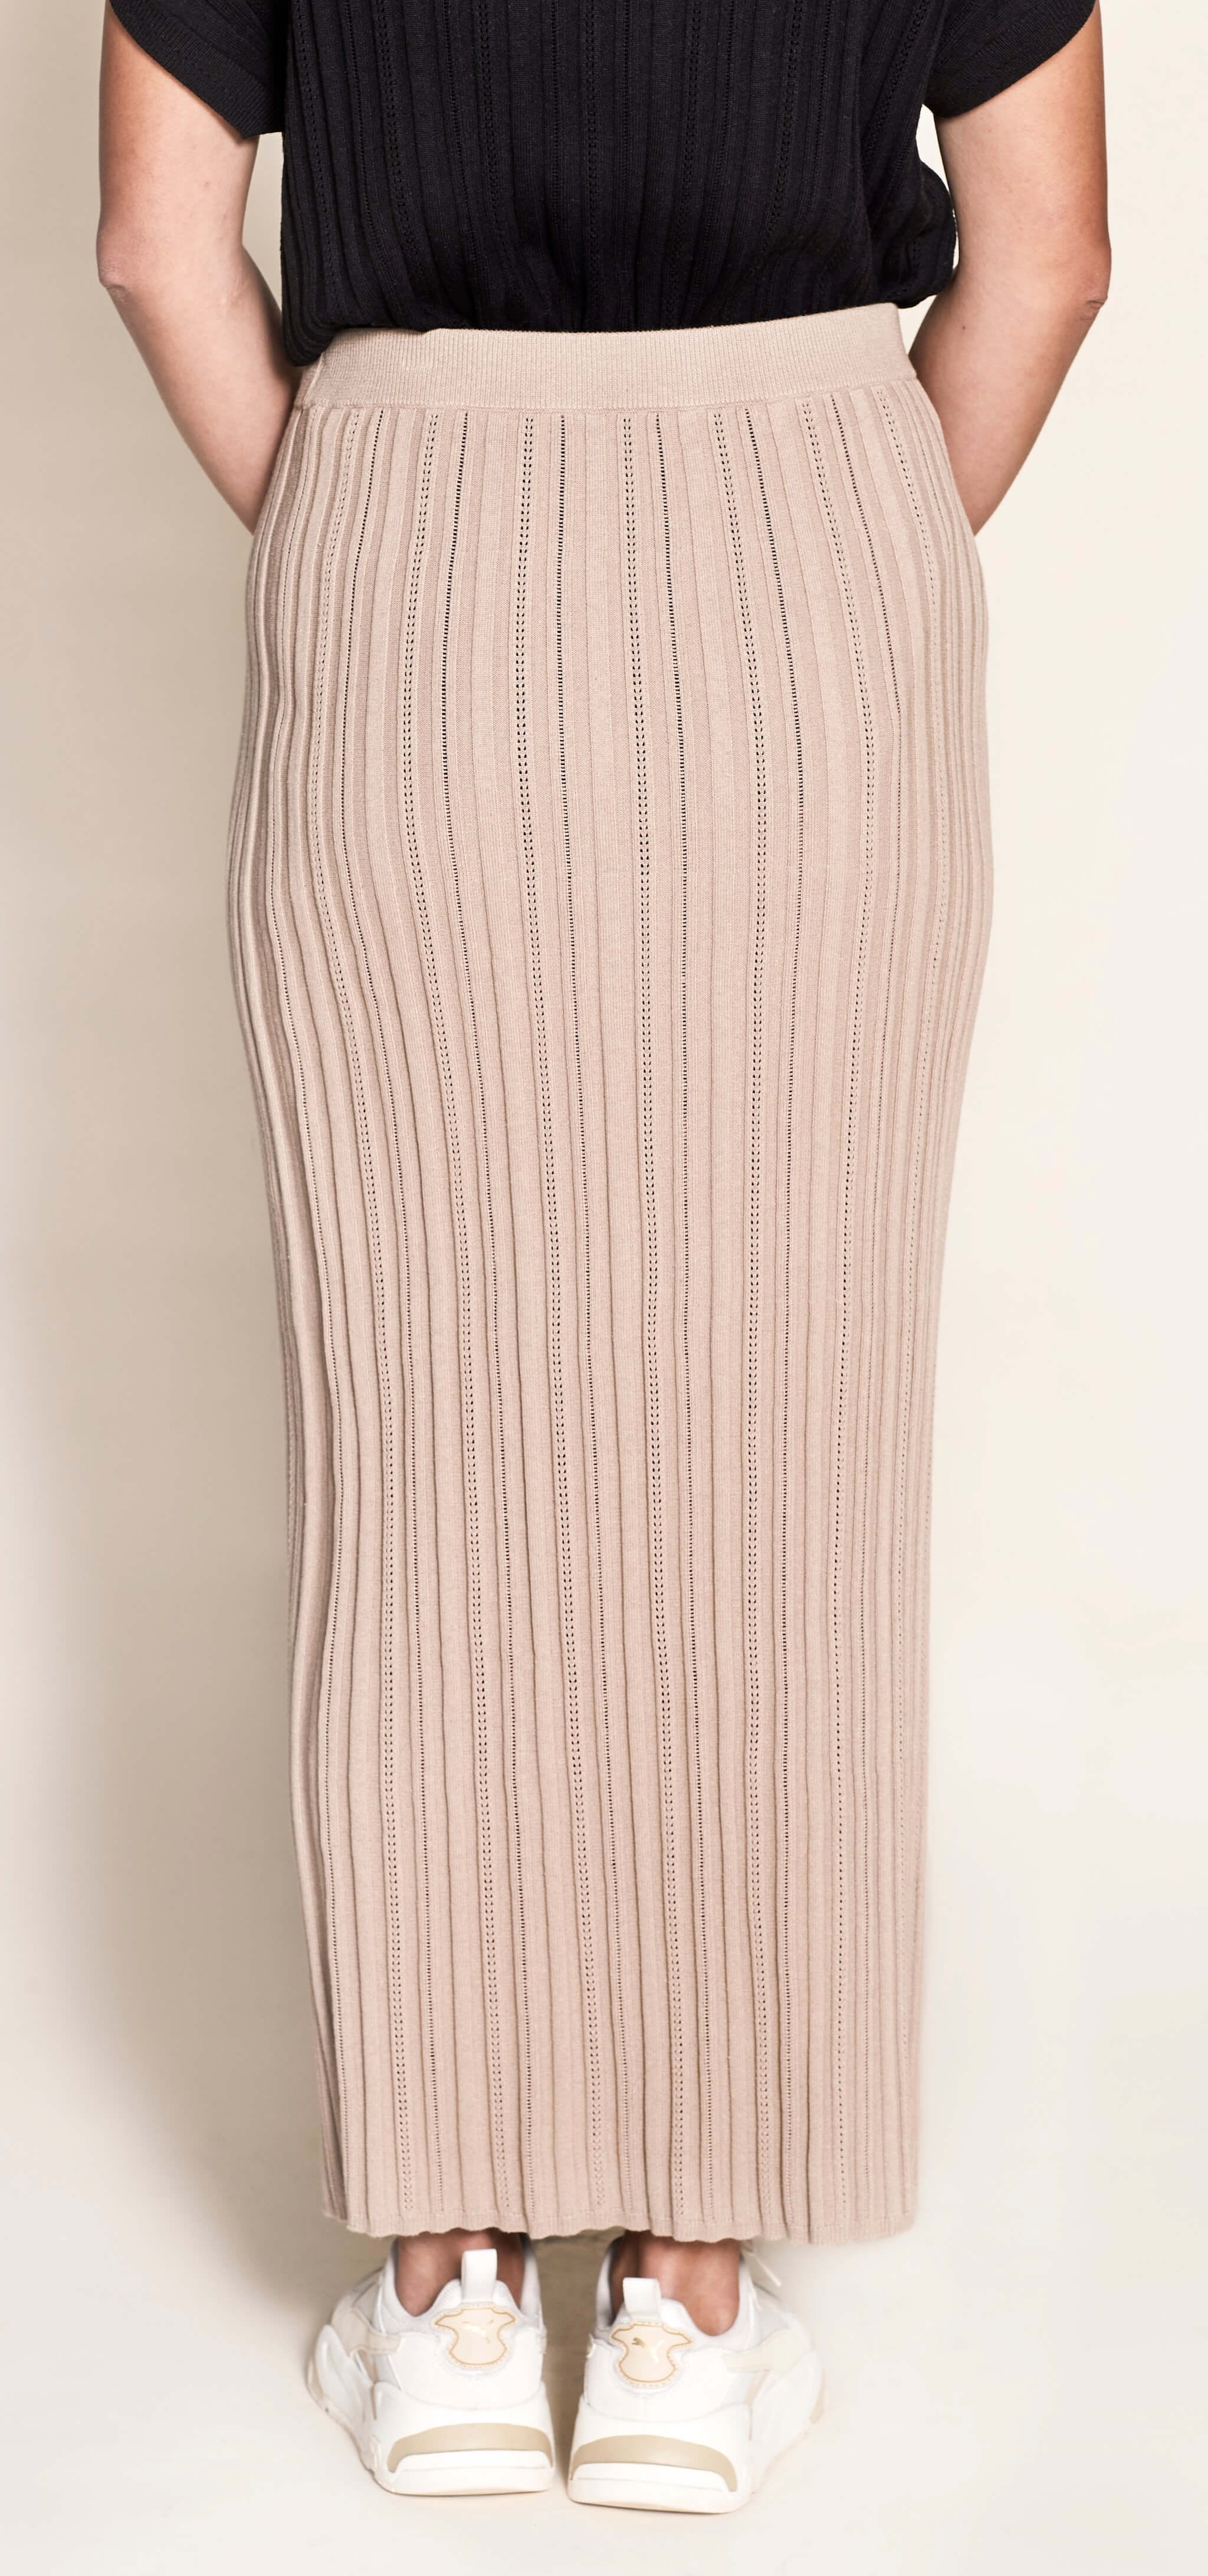 Rear view of a Cyme Copenhagen pointelle ribbed knit pencil skirt in a natural beige tone, showcasing the elegance and sustainable quality of Scandinavian womenswear.